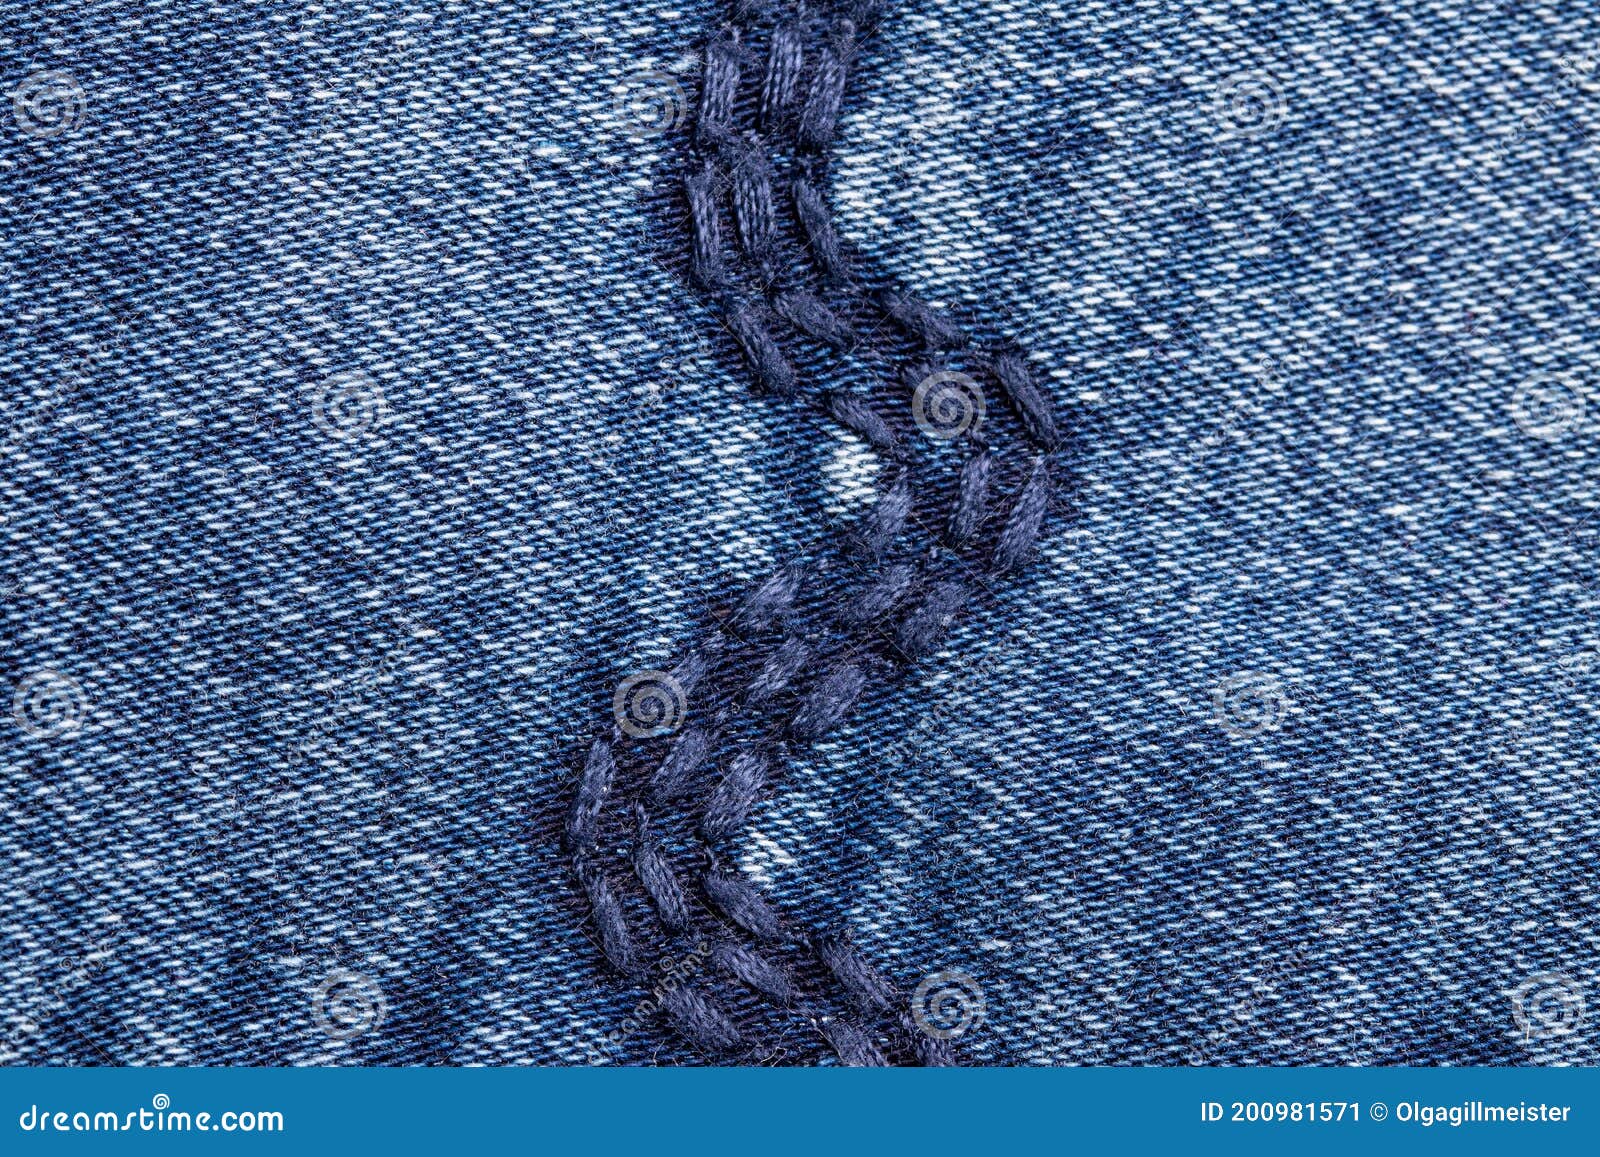 Afvist Stå på ski Bane Denim Background Texture. Close-up of Details of a Light Blue Jeans Fabric  Jean Surface with Fashion Embroidery in Blue Colours. Stock Image - Image  of background, fiber: 200981571